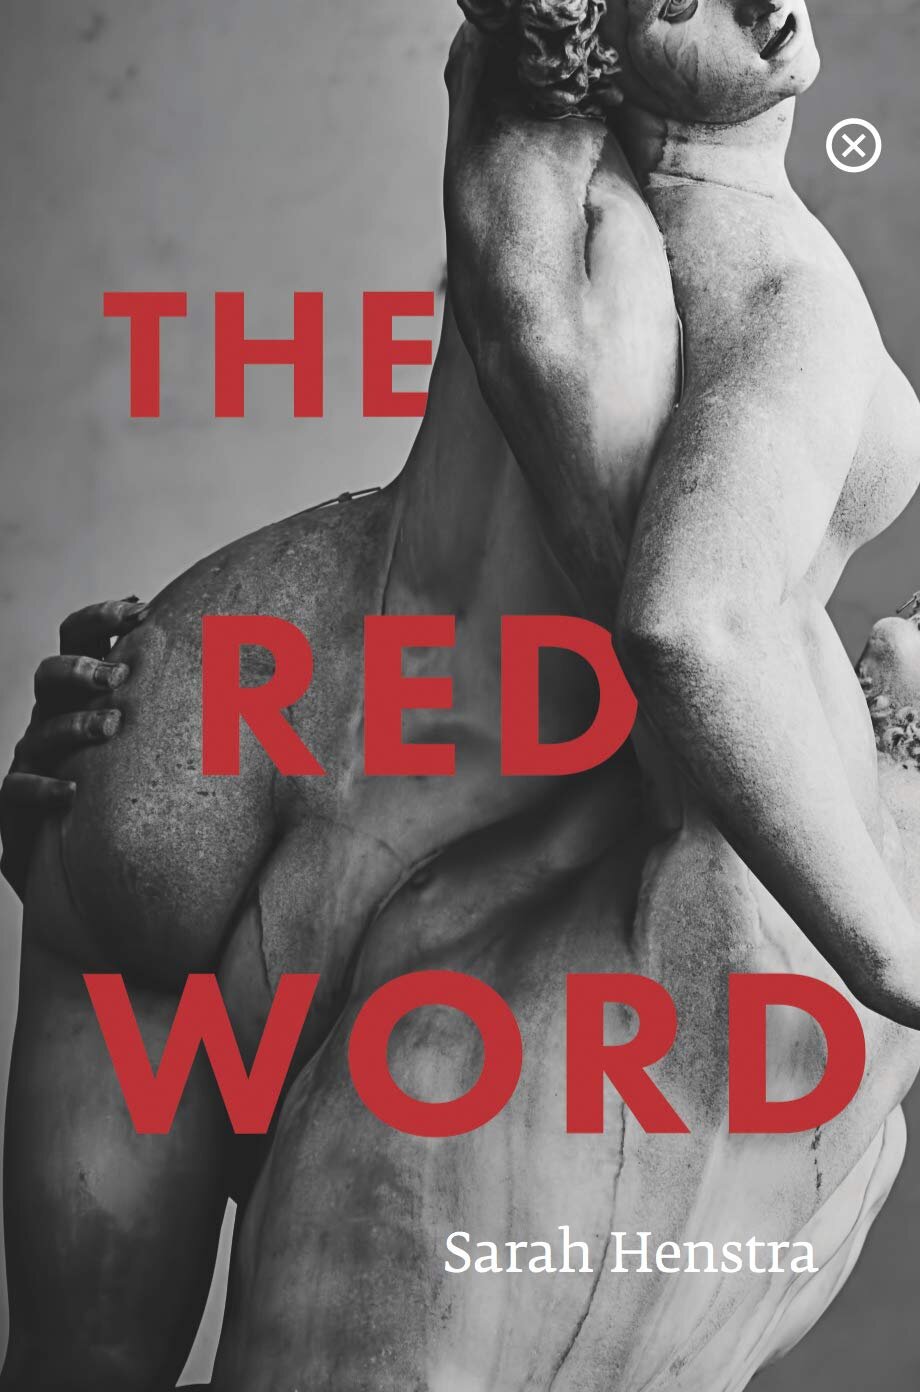 The Red Word by Sarah Henstra (Tramp Press)